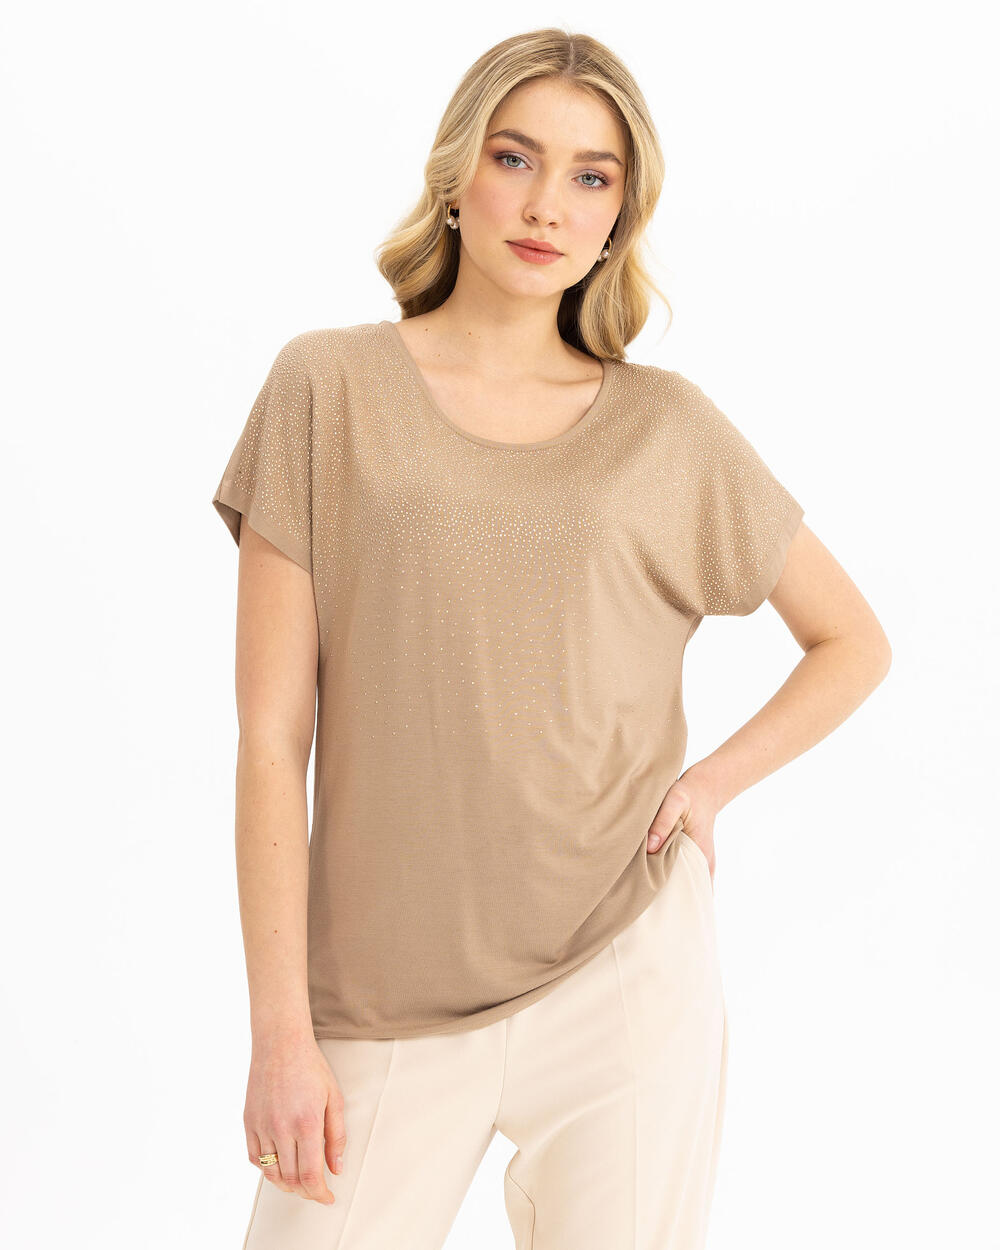 ROUND NECK T-SHIRT WITH STONES